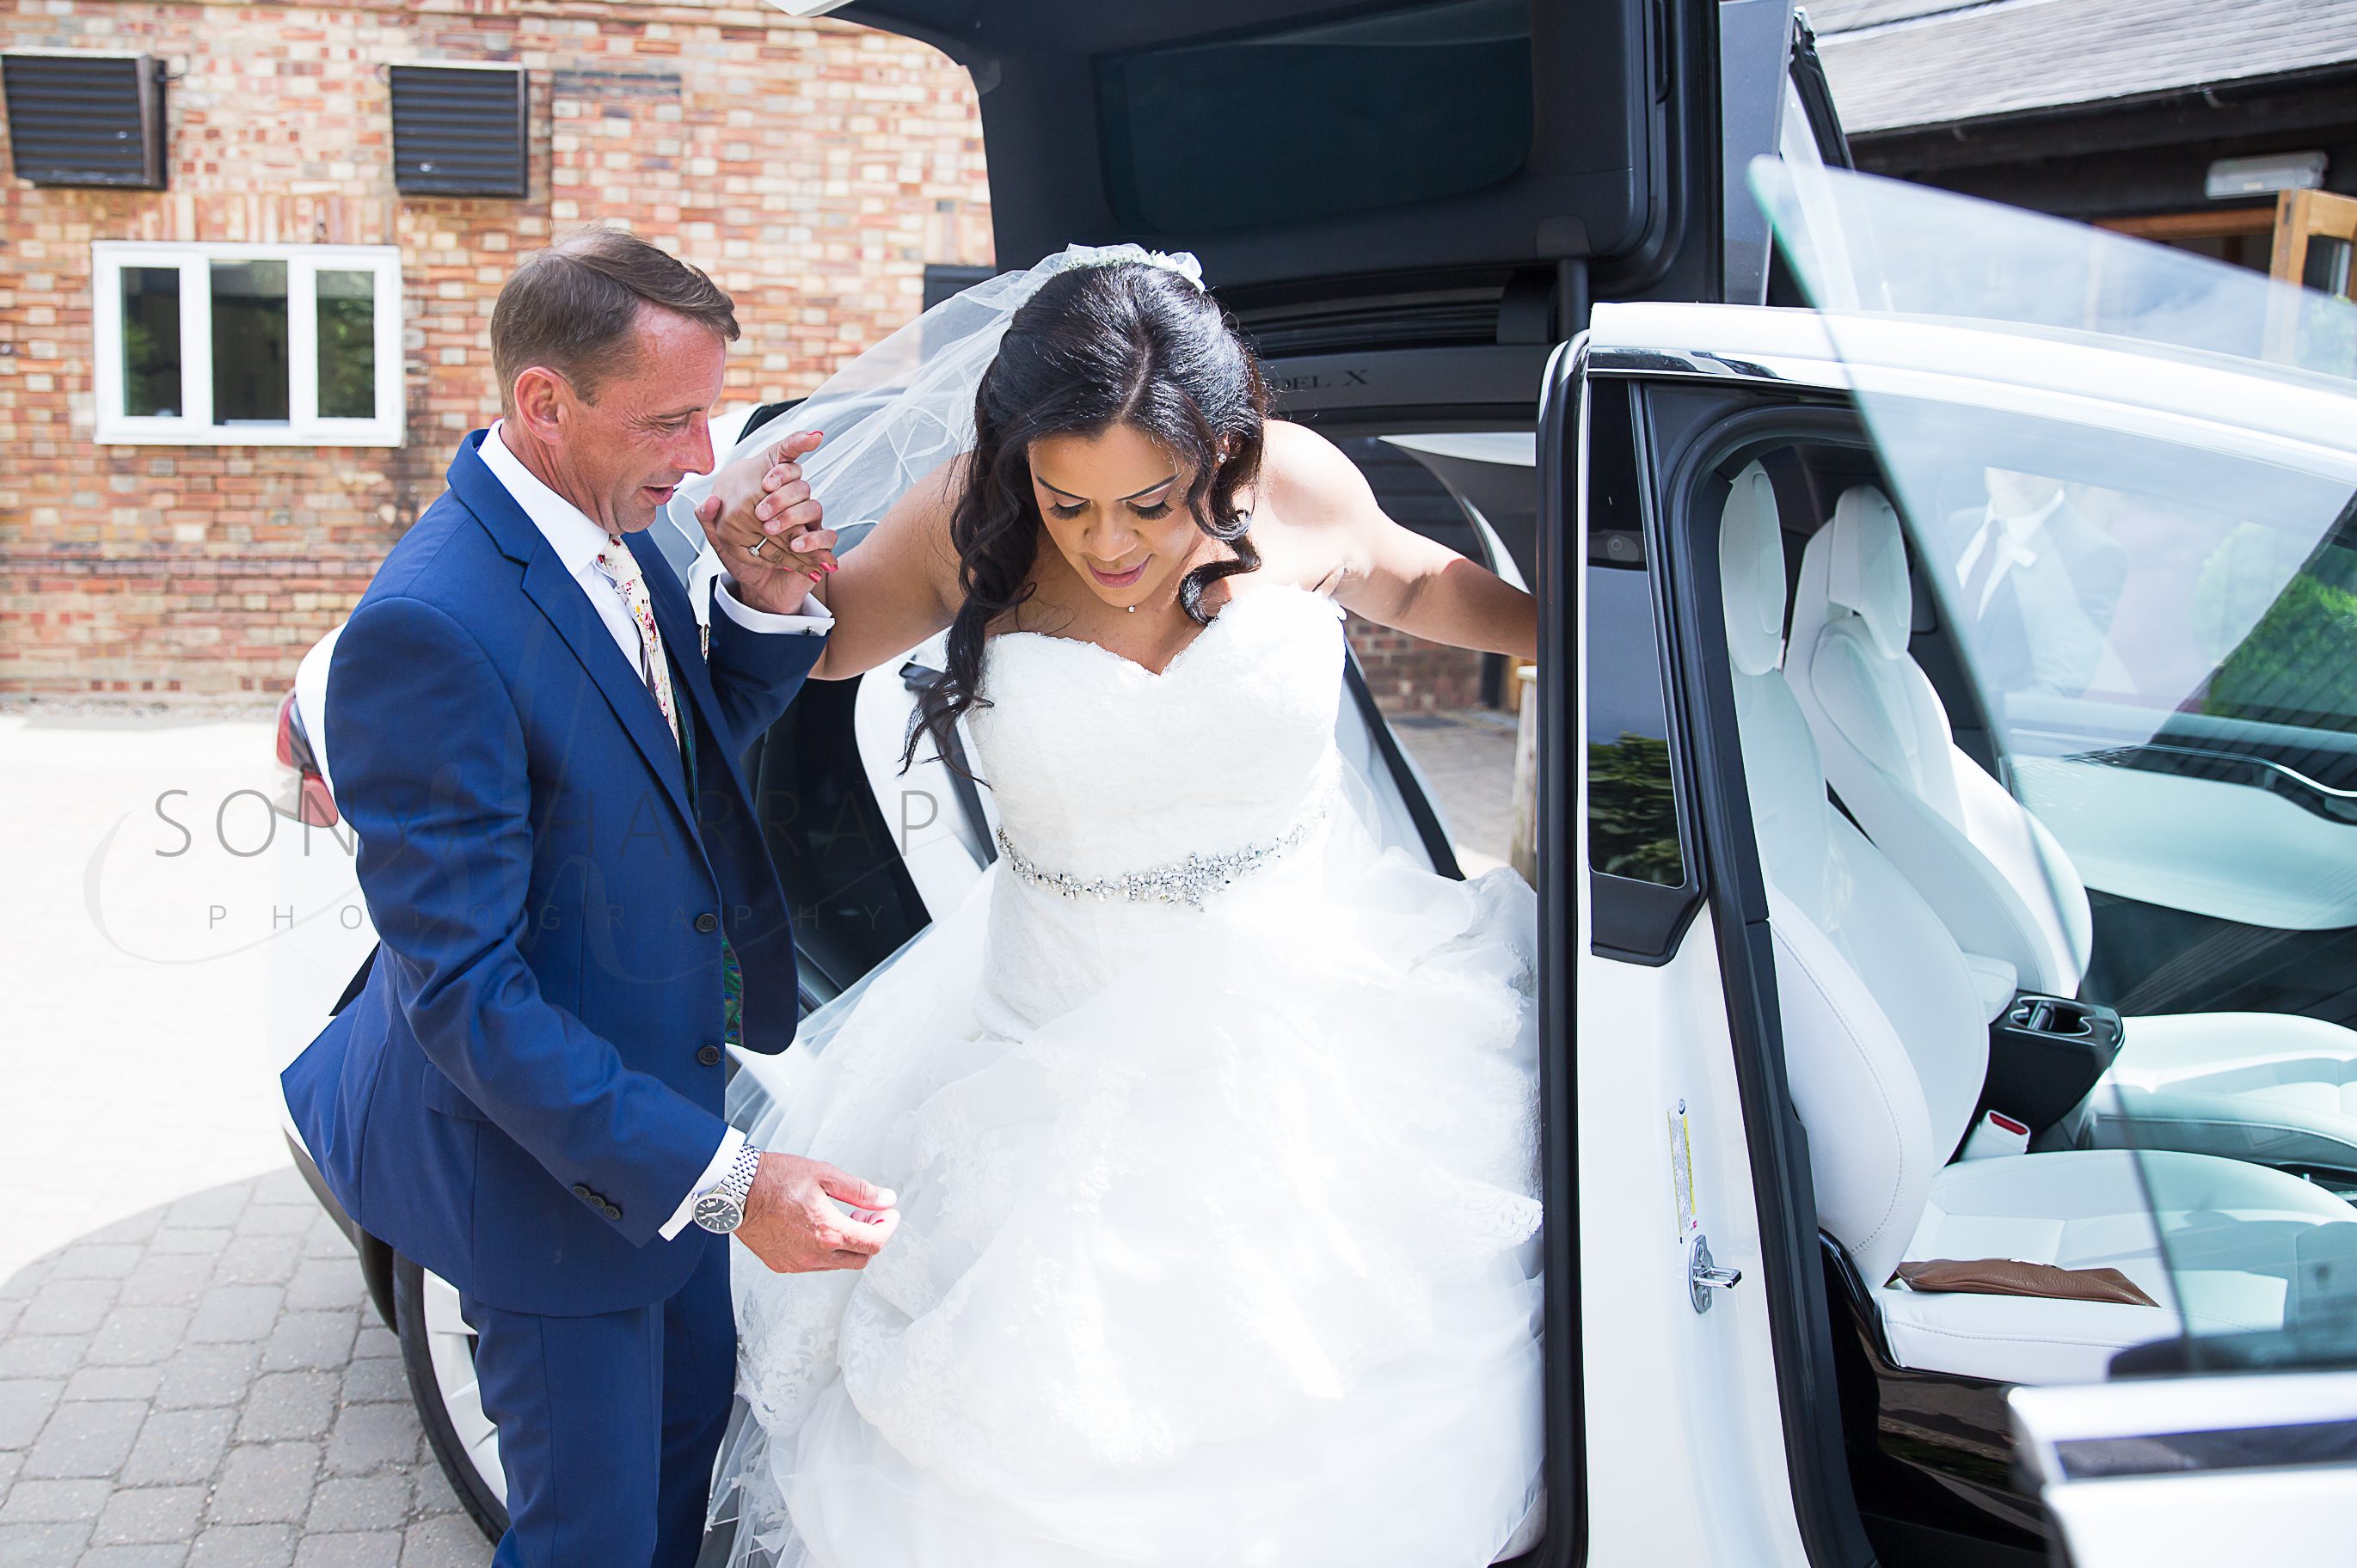 bride getting out of car before wedding ceremony Tewinbury farm hotel outdoor wedding photograph of bride and groom by Sonya Harrap photographer